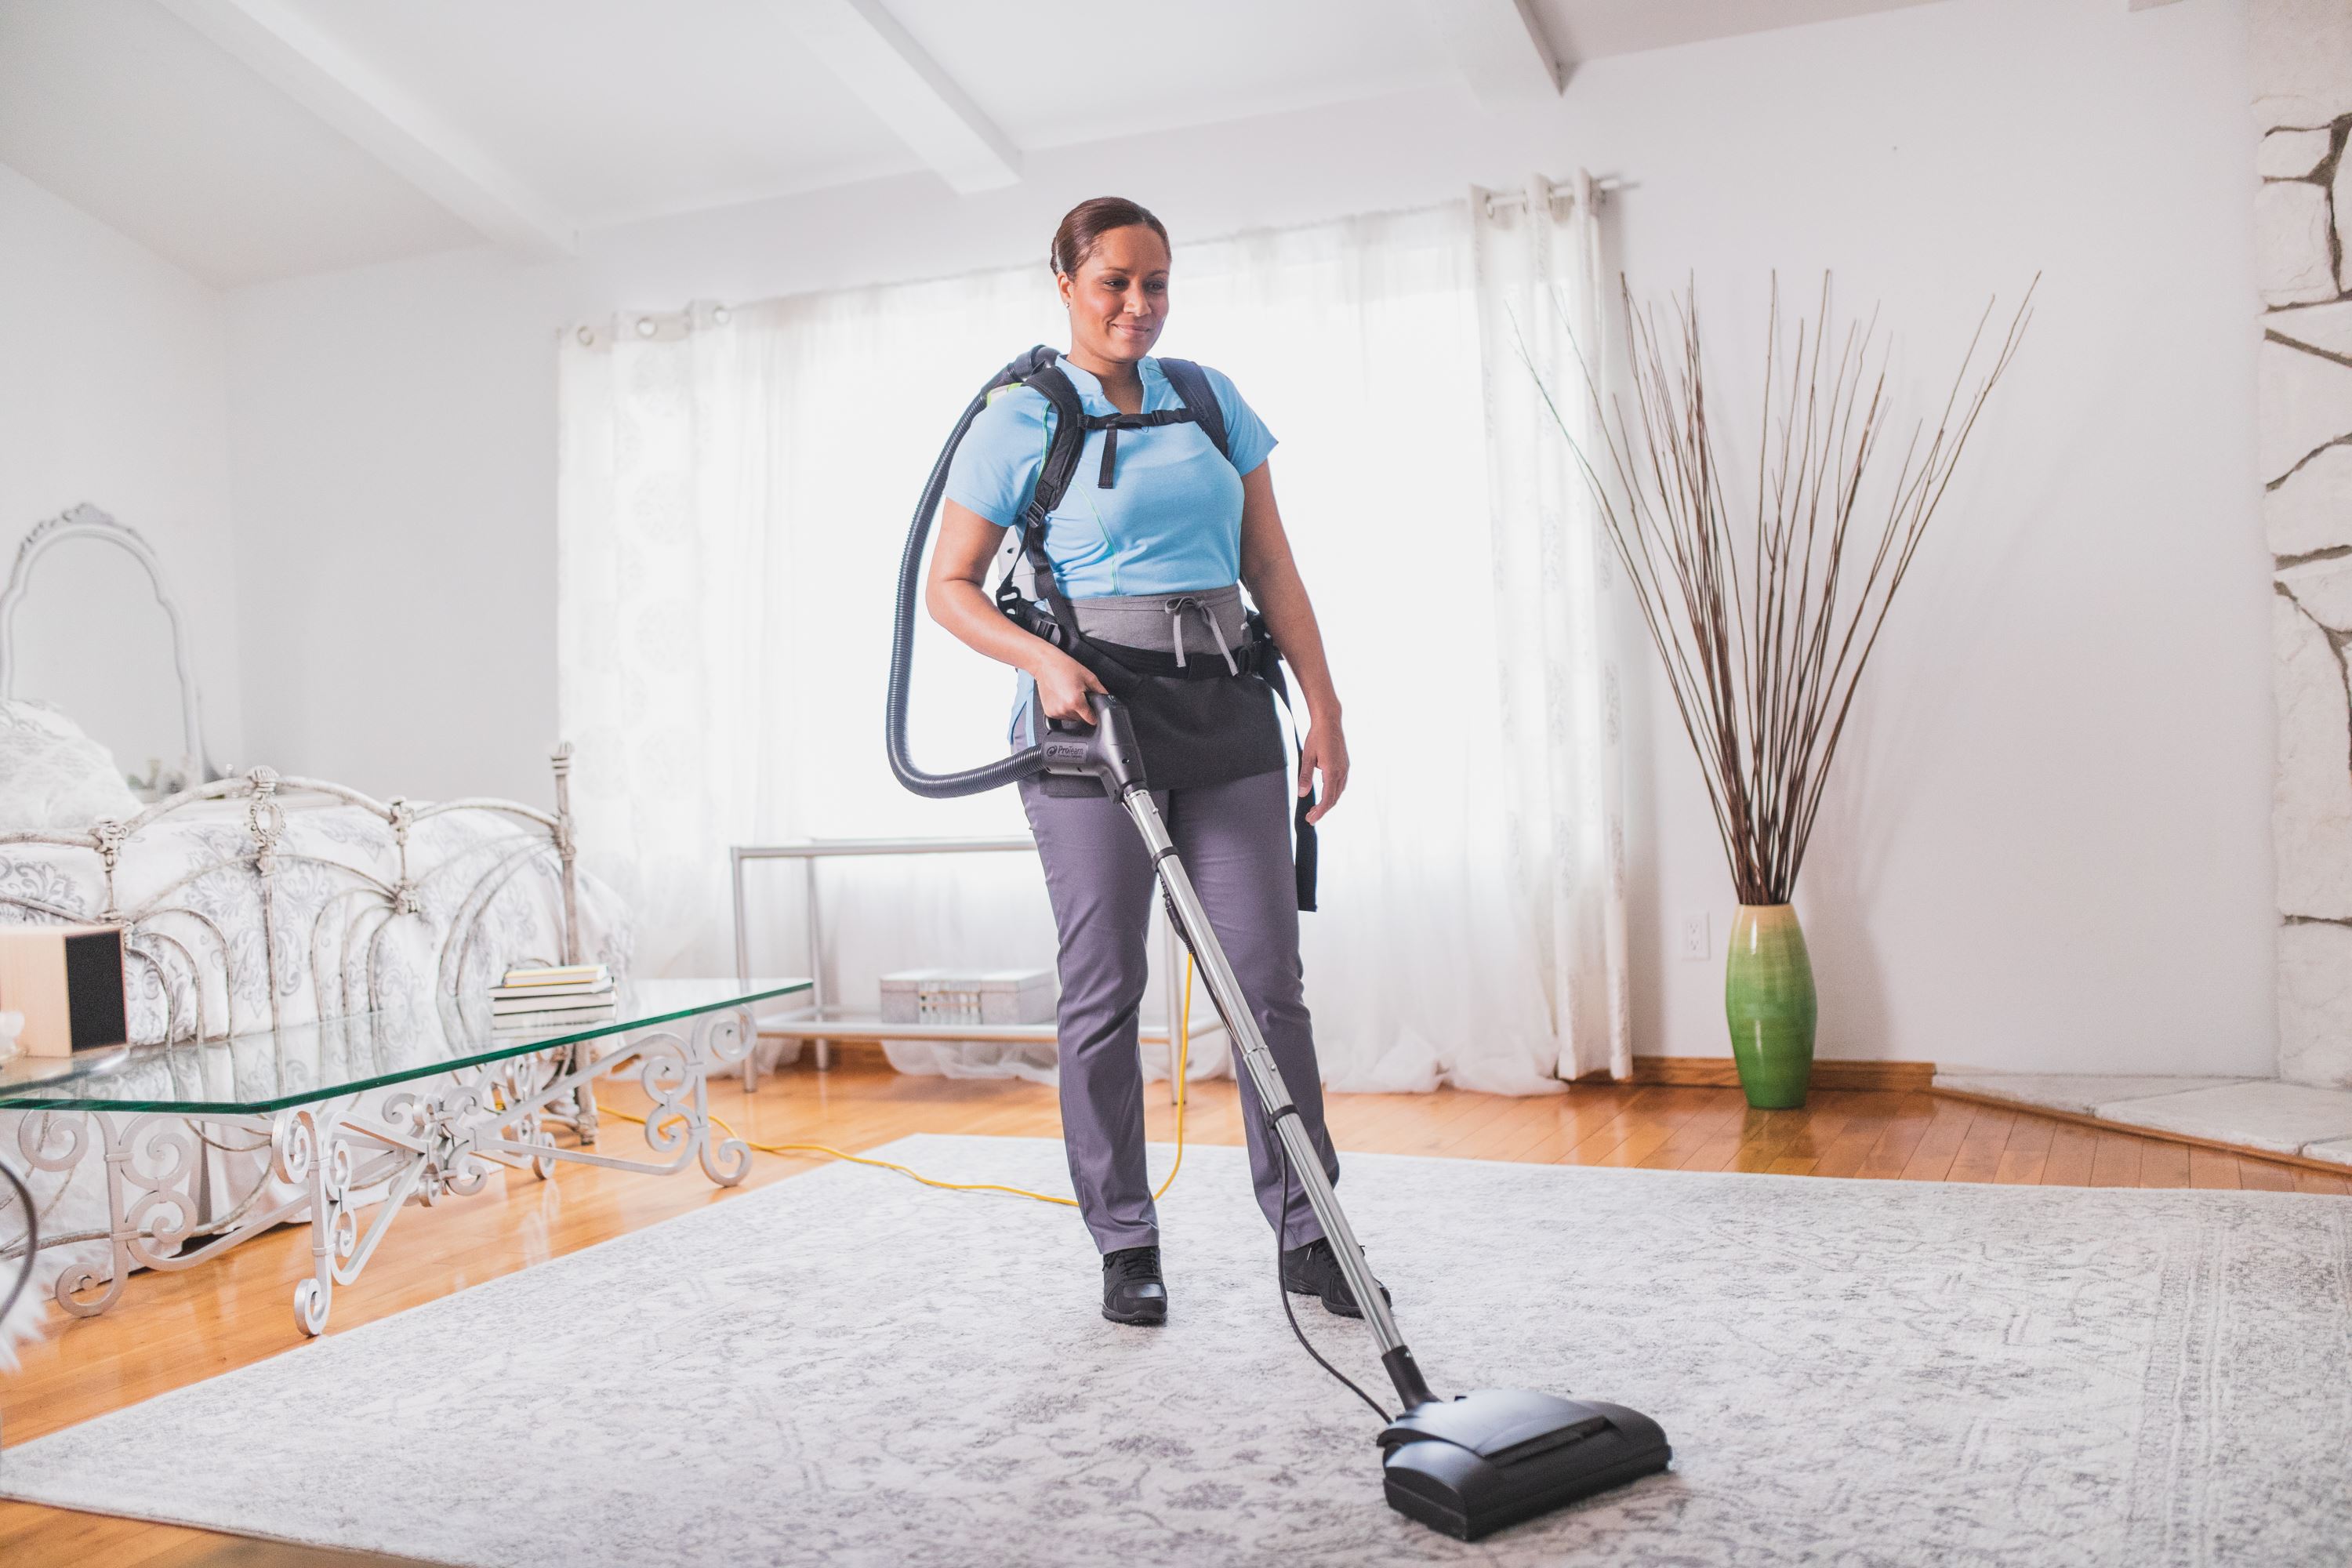 Merry Maids team member vacuuming during maid service